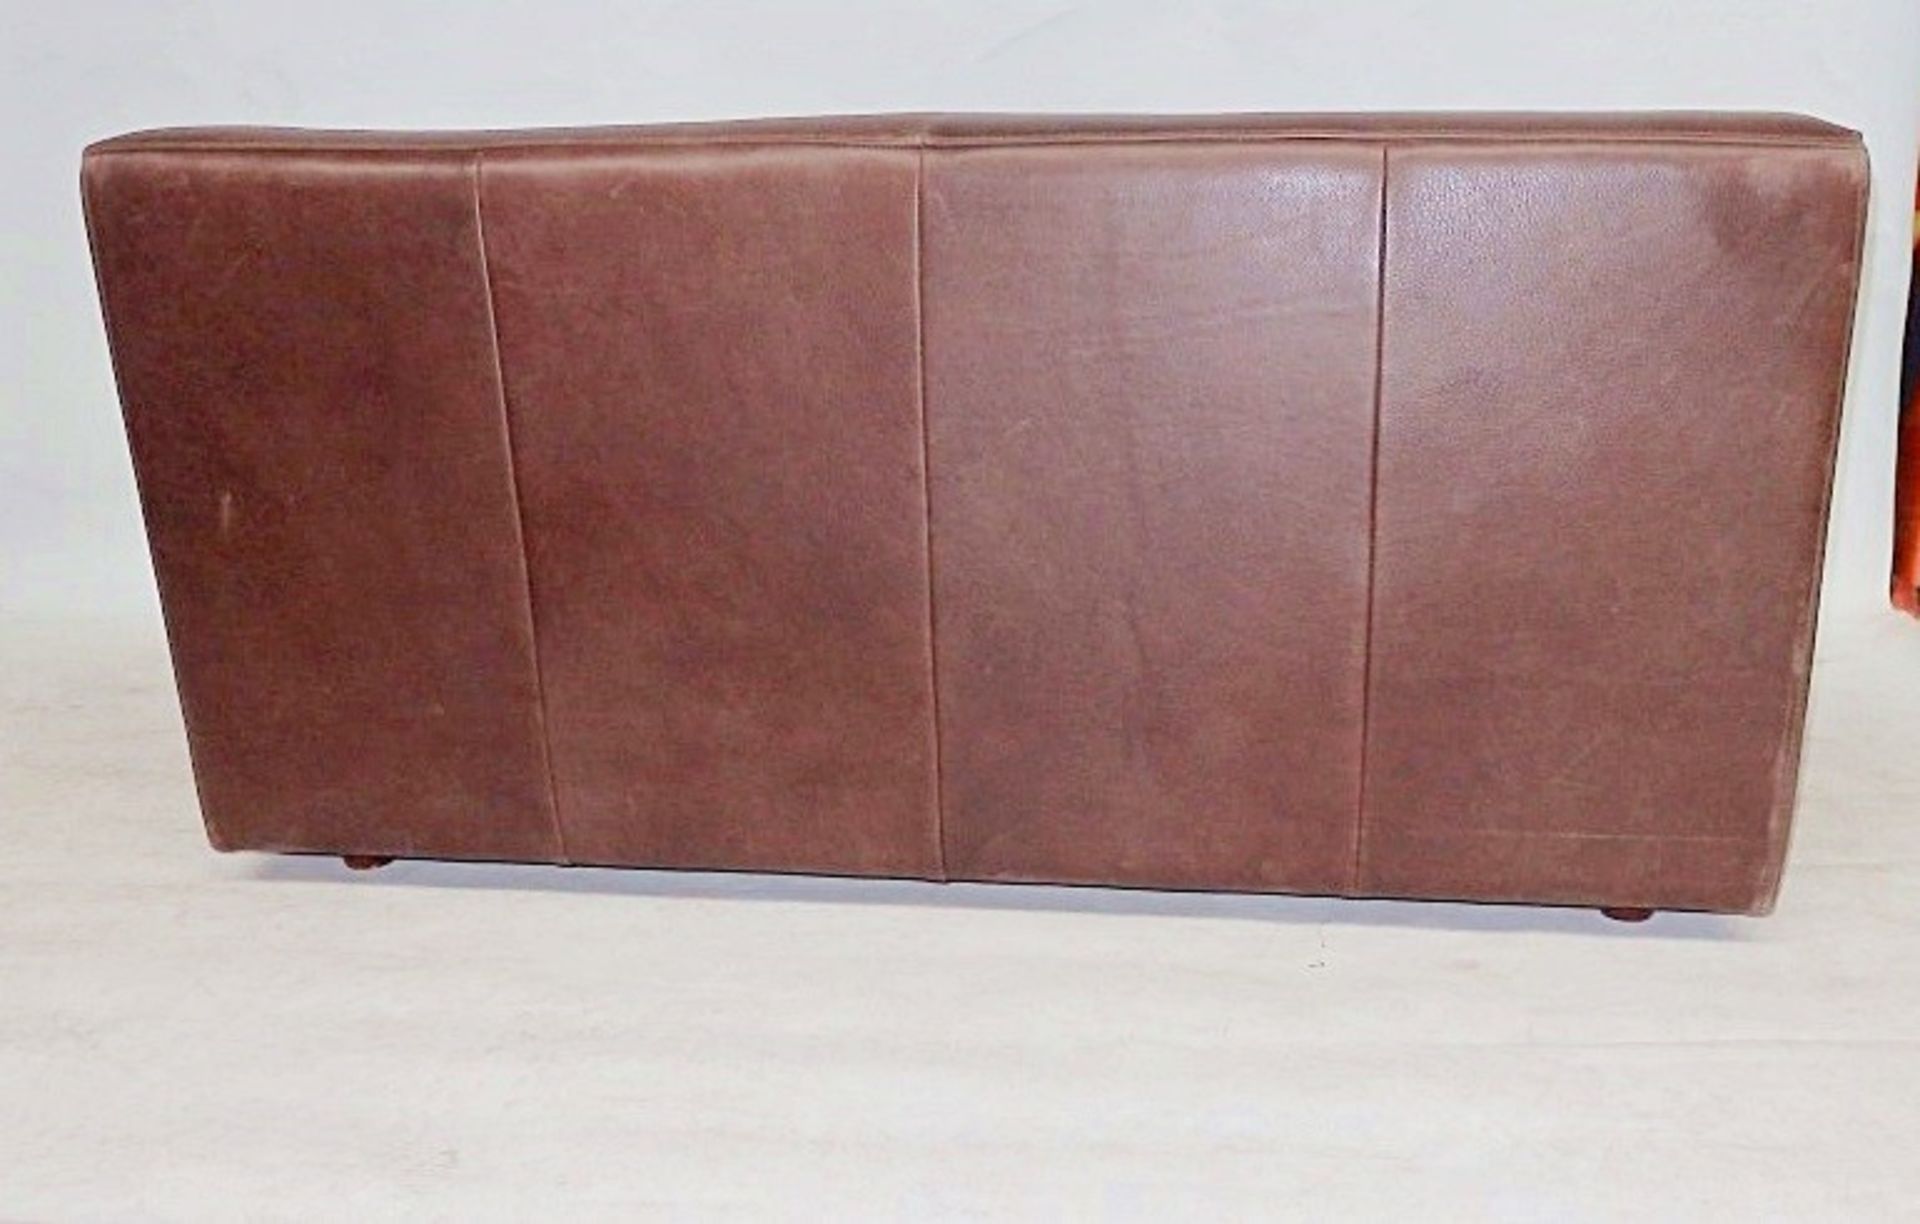 1 x Bespoke Brown Leather Sofa With Large Fabric Covered Seat Cushion - Dimensions: W130 x D92 x - Image 2 of 4